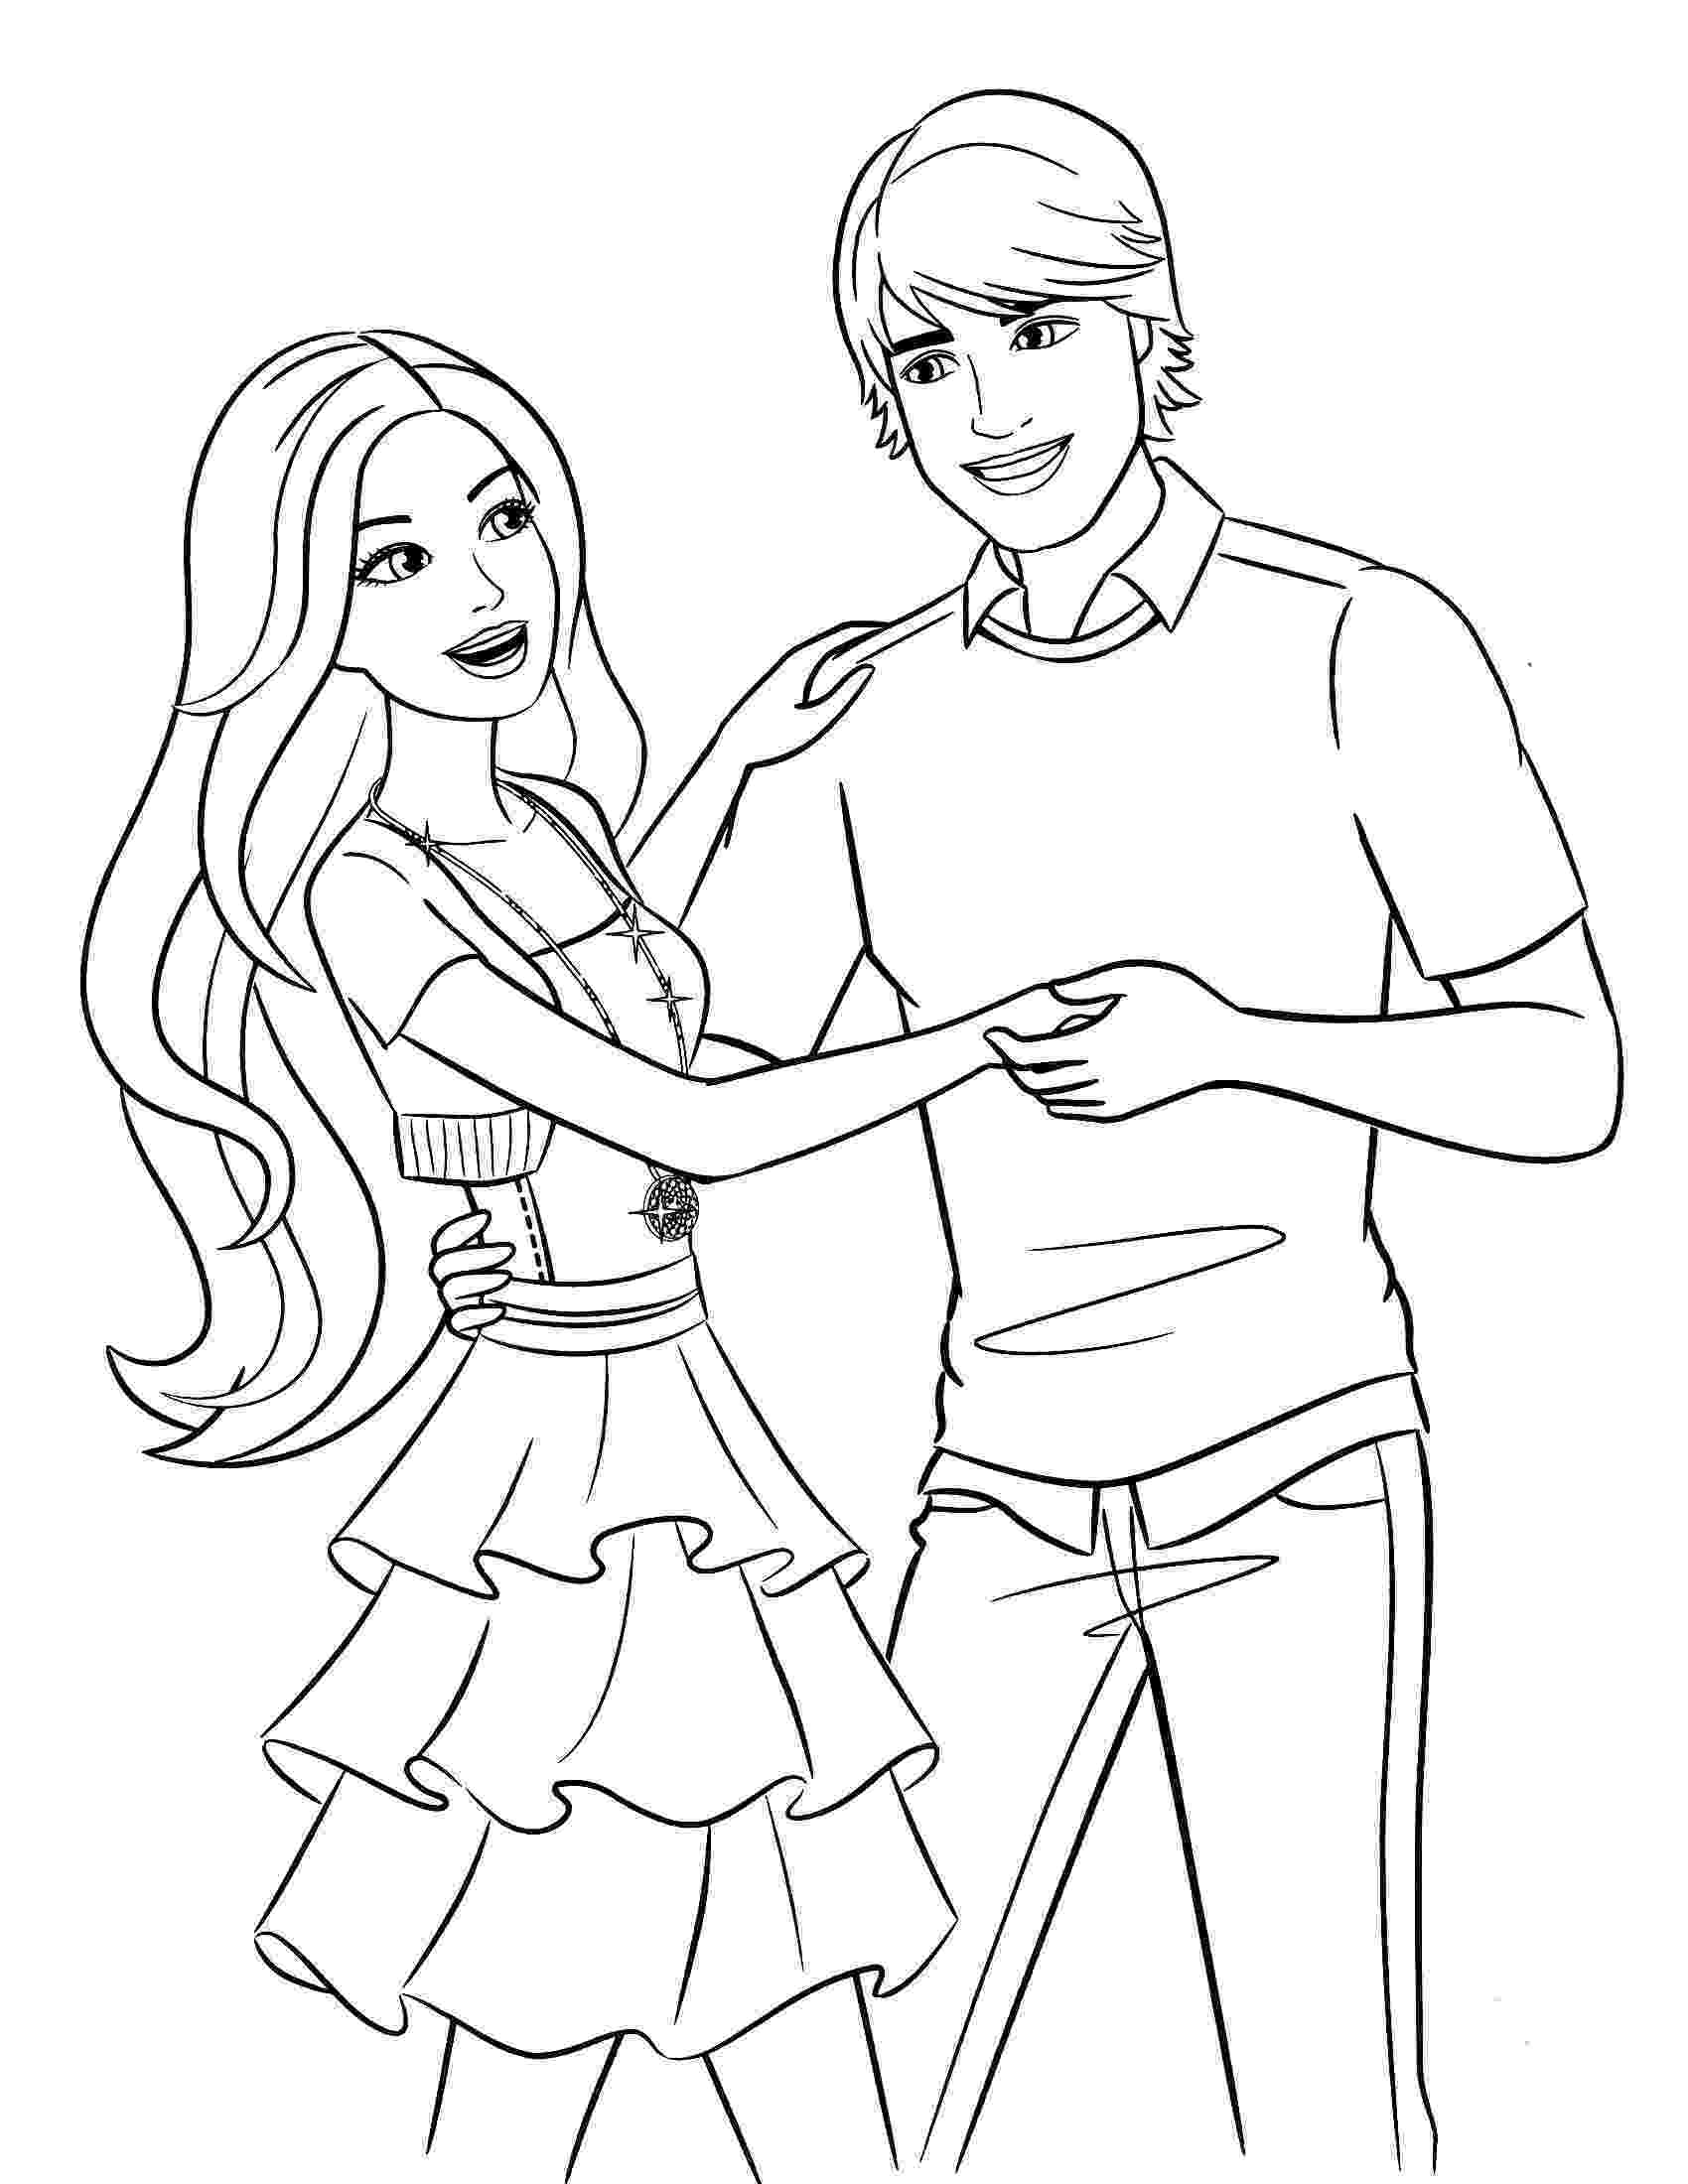 barbie coloring pages for kids barbie to print barbie kids coloring pages kids pages coloring for barbie 